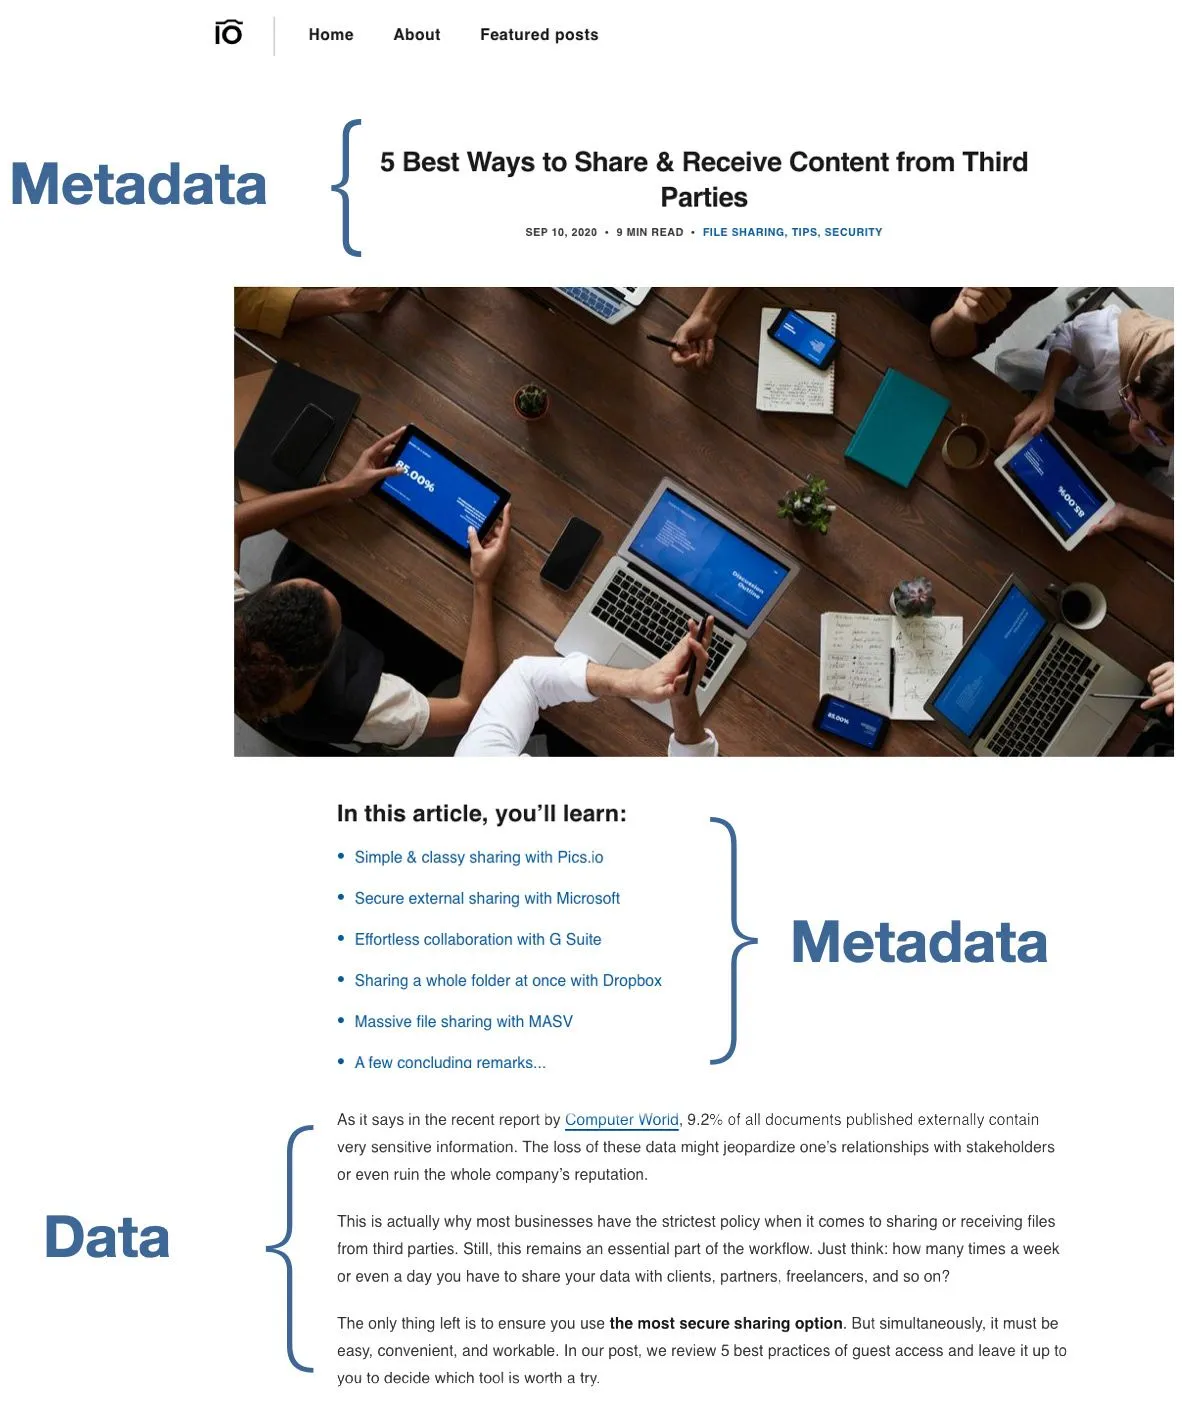 Visual illustration of difference between data and metadata